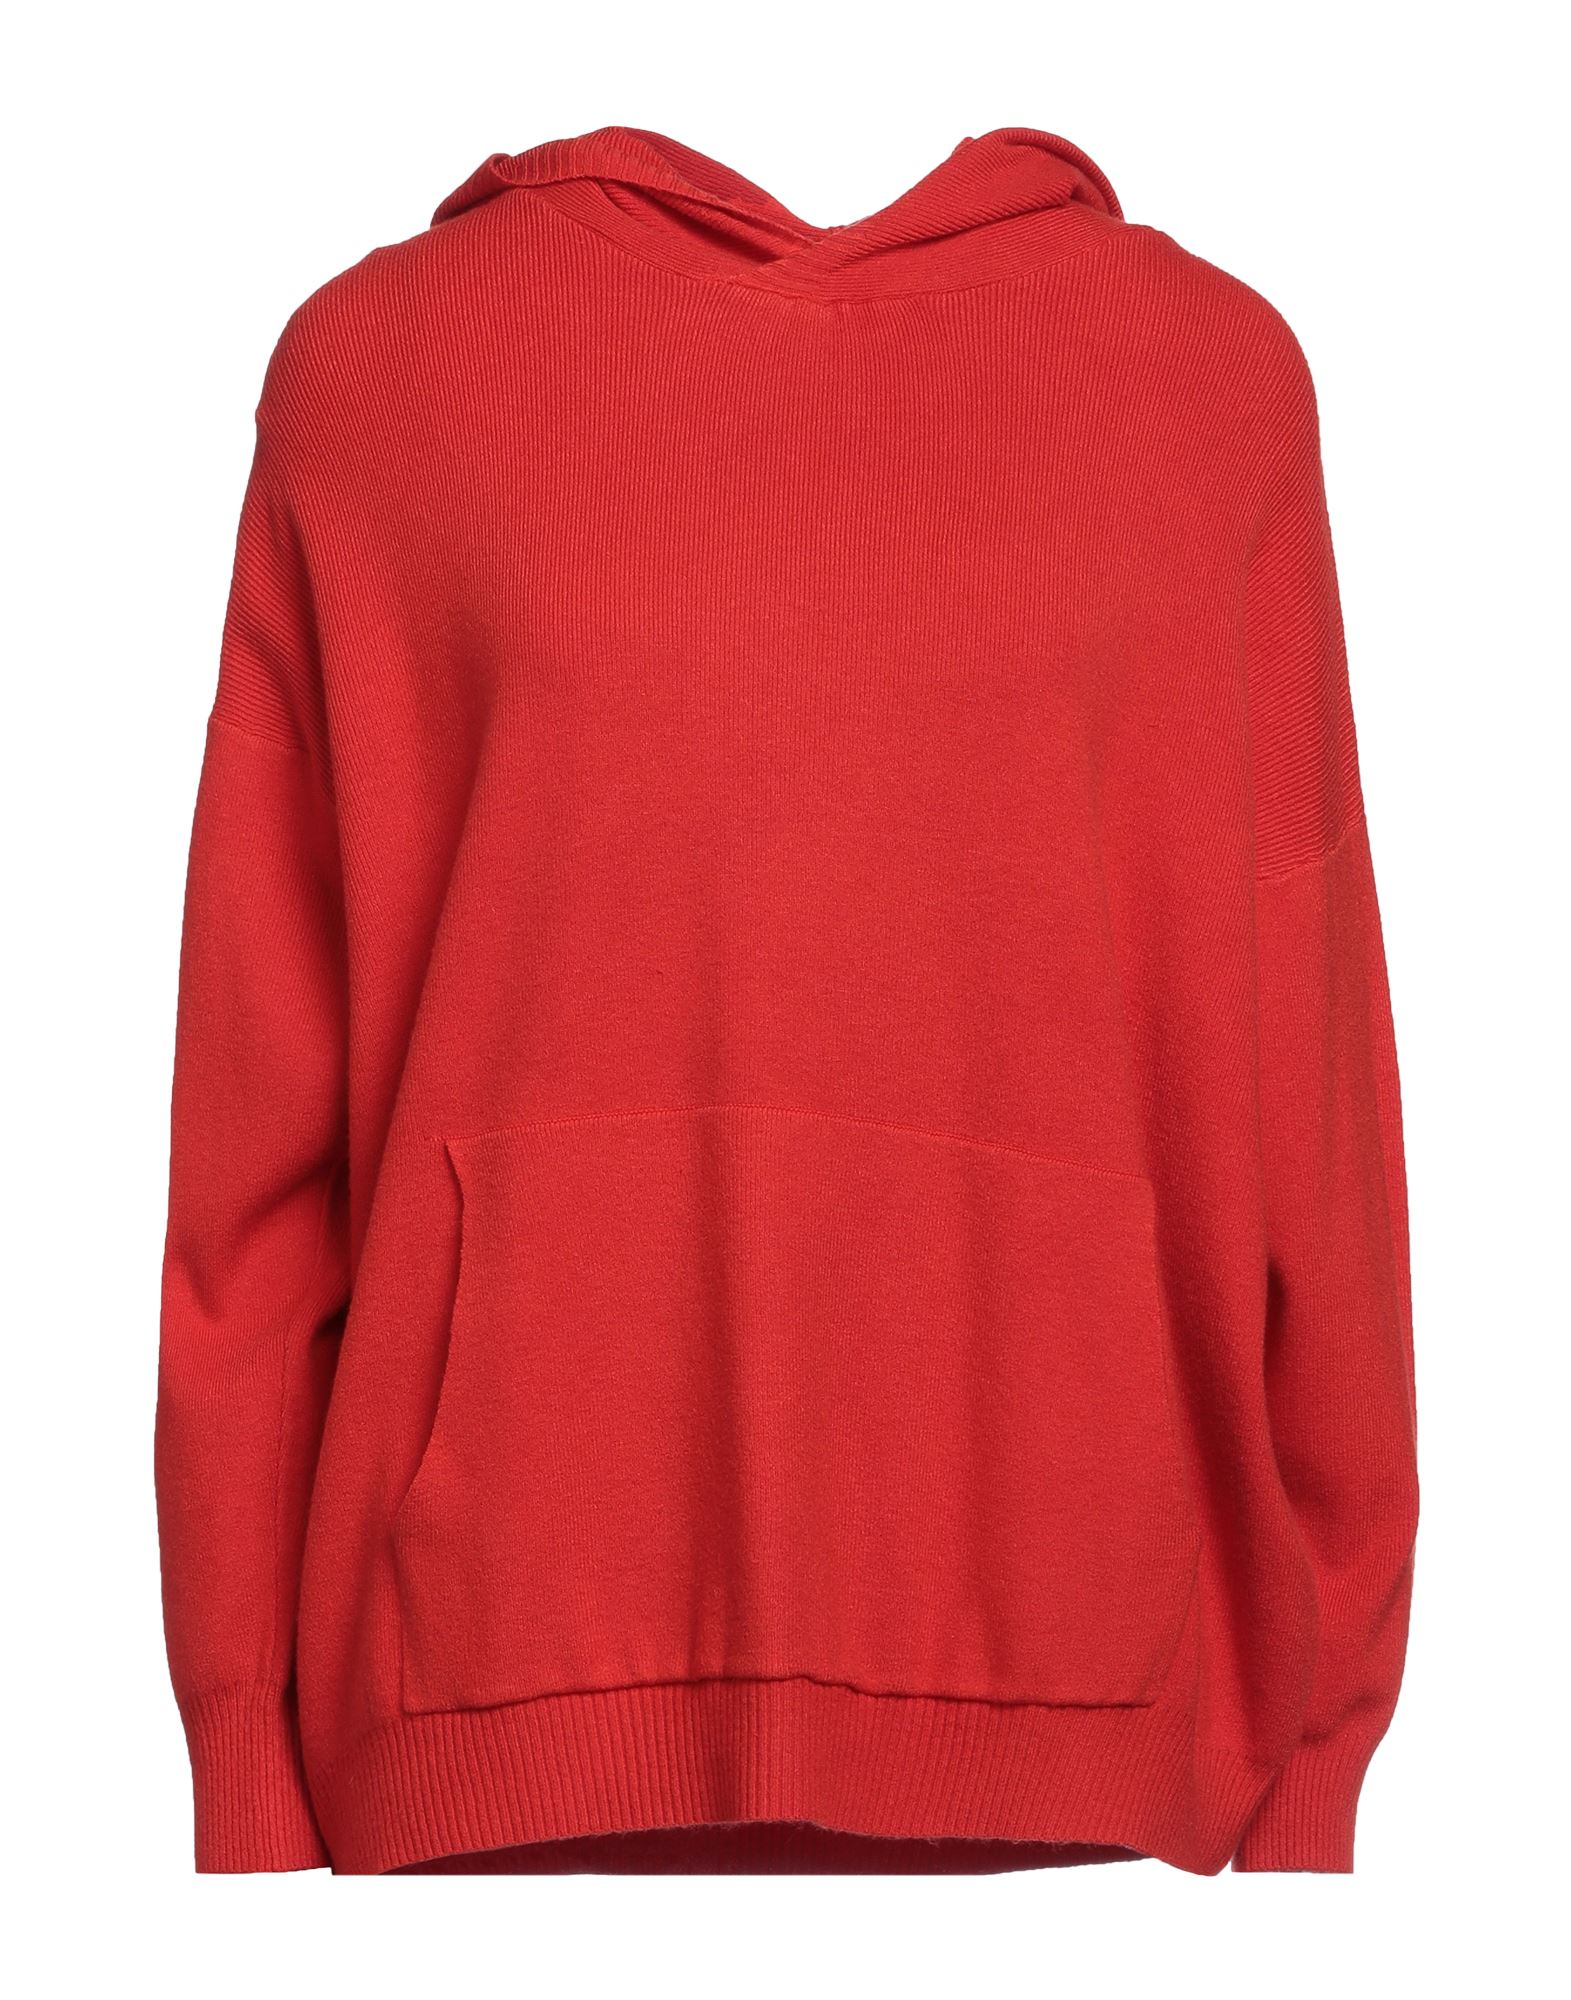 Amelie Rêveur Woman Sweater Red Size M/l Viscose, Polyester, Nylon